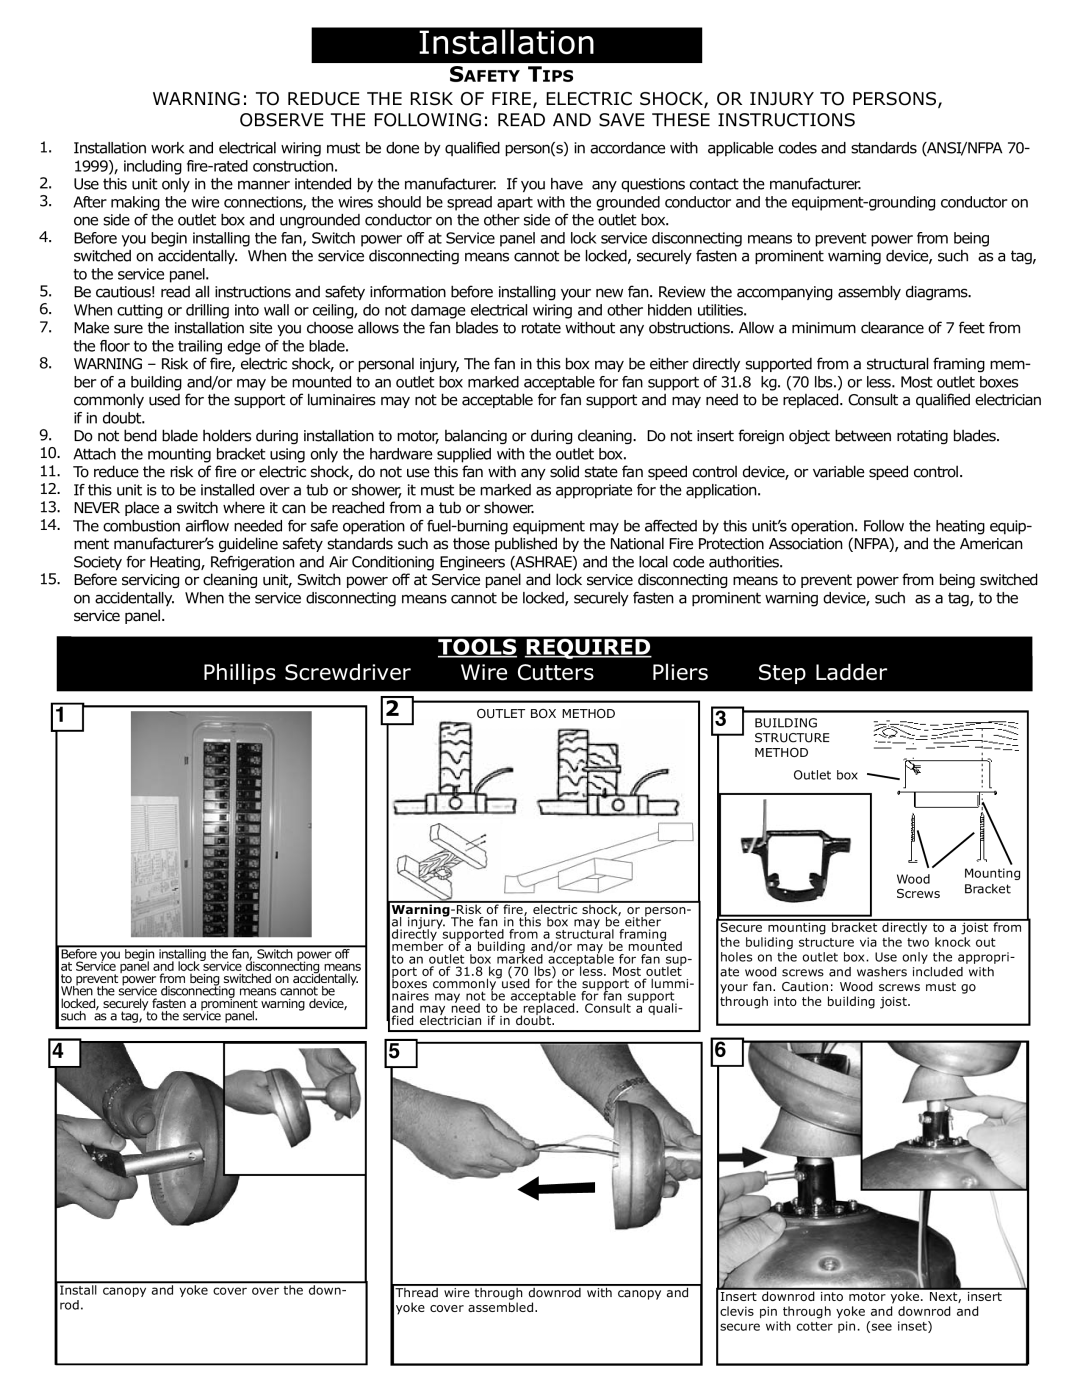 Monte Carlo Fan Company 5MX Observe The Following Read And Save These Instructions, Safety Tips, Phillips Screwdriver 